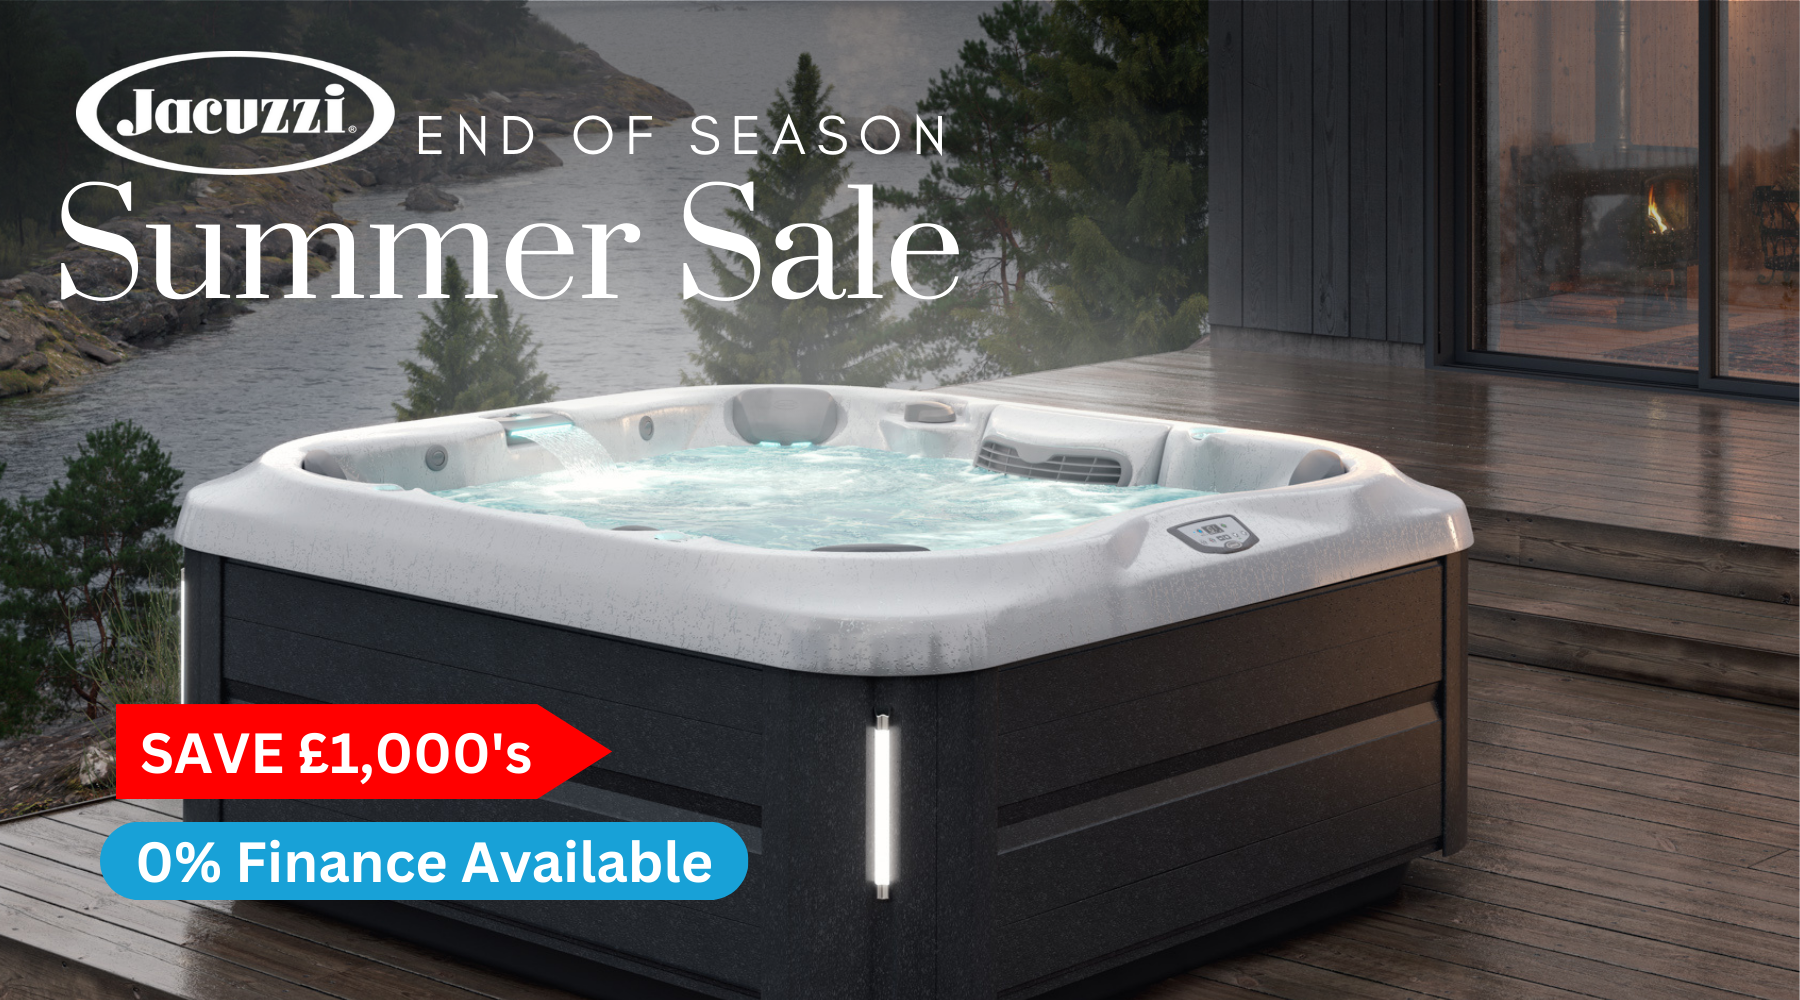 End_of_Season_Summer_Sale_Facebook_Post_1800_x_1000px_1 - Hot Tub Liverpool